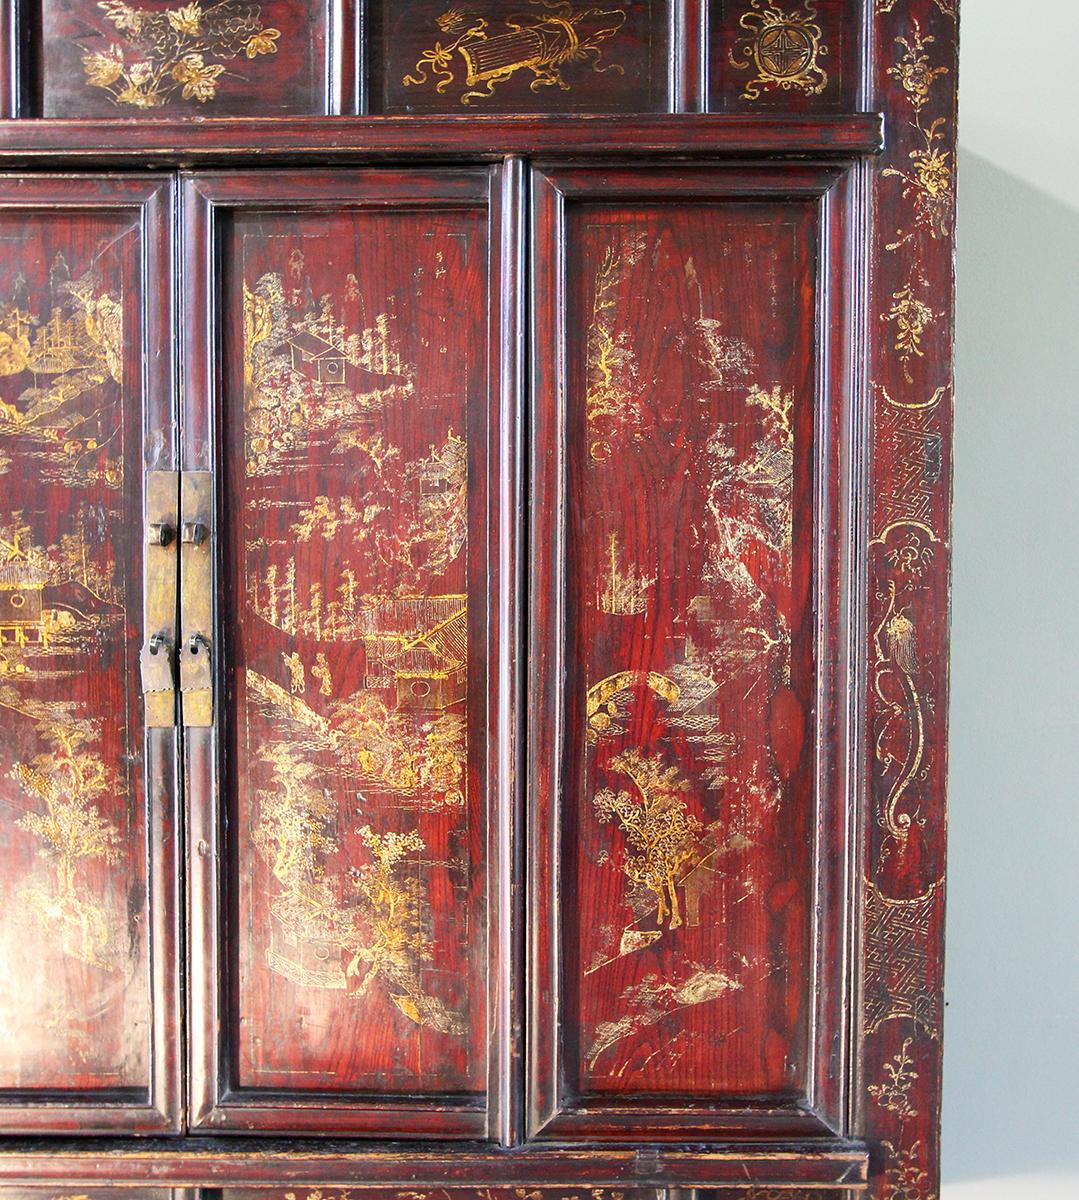 Chinese cabinet with two doors. Elmwood and lacquer and gold decorations with figures and pagodas.
China Shanxi Province, early 19th century.